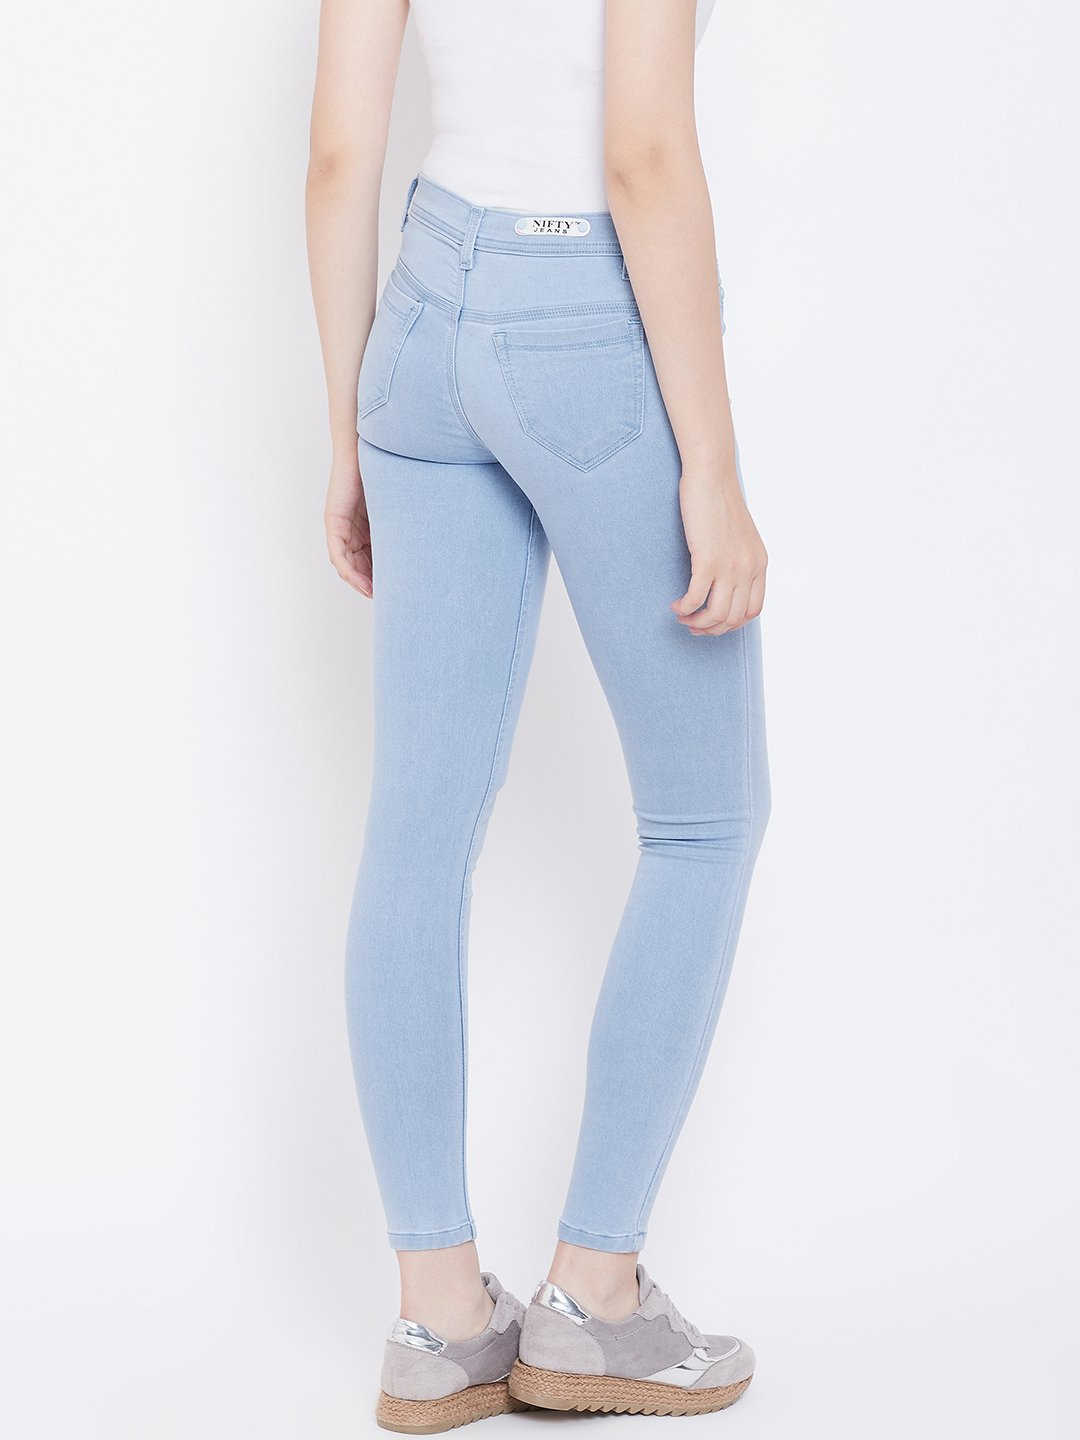 Slim Fit Stretchable Sky Blue Jeans - NiftyJeans